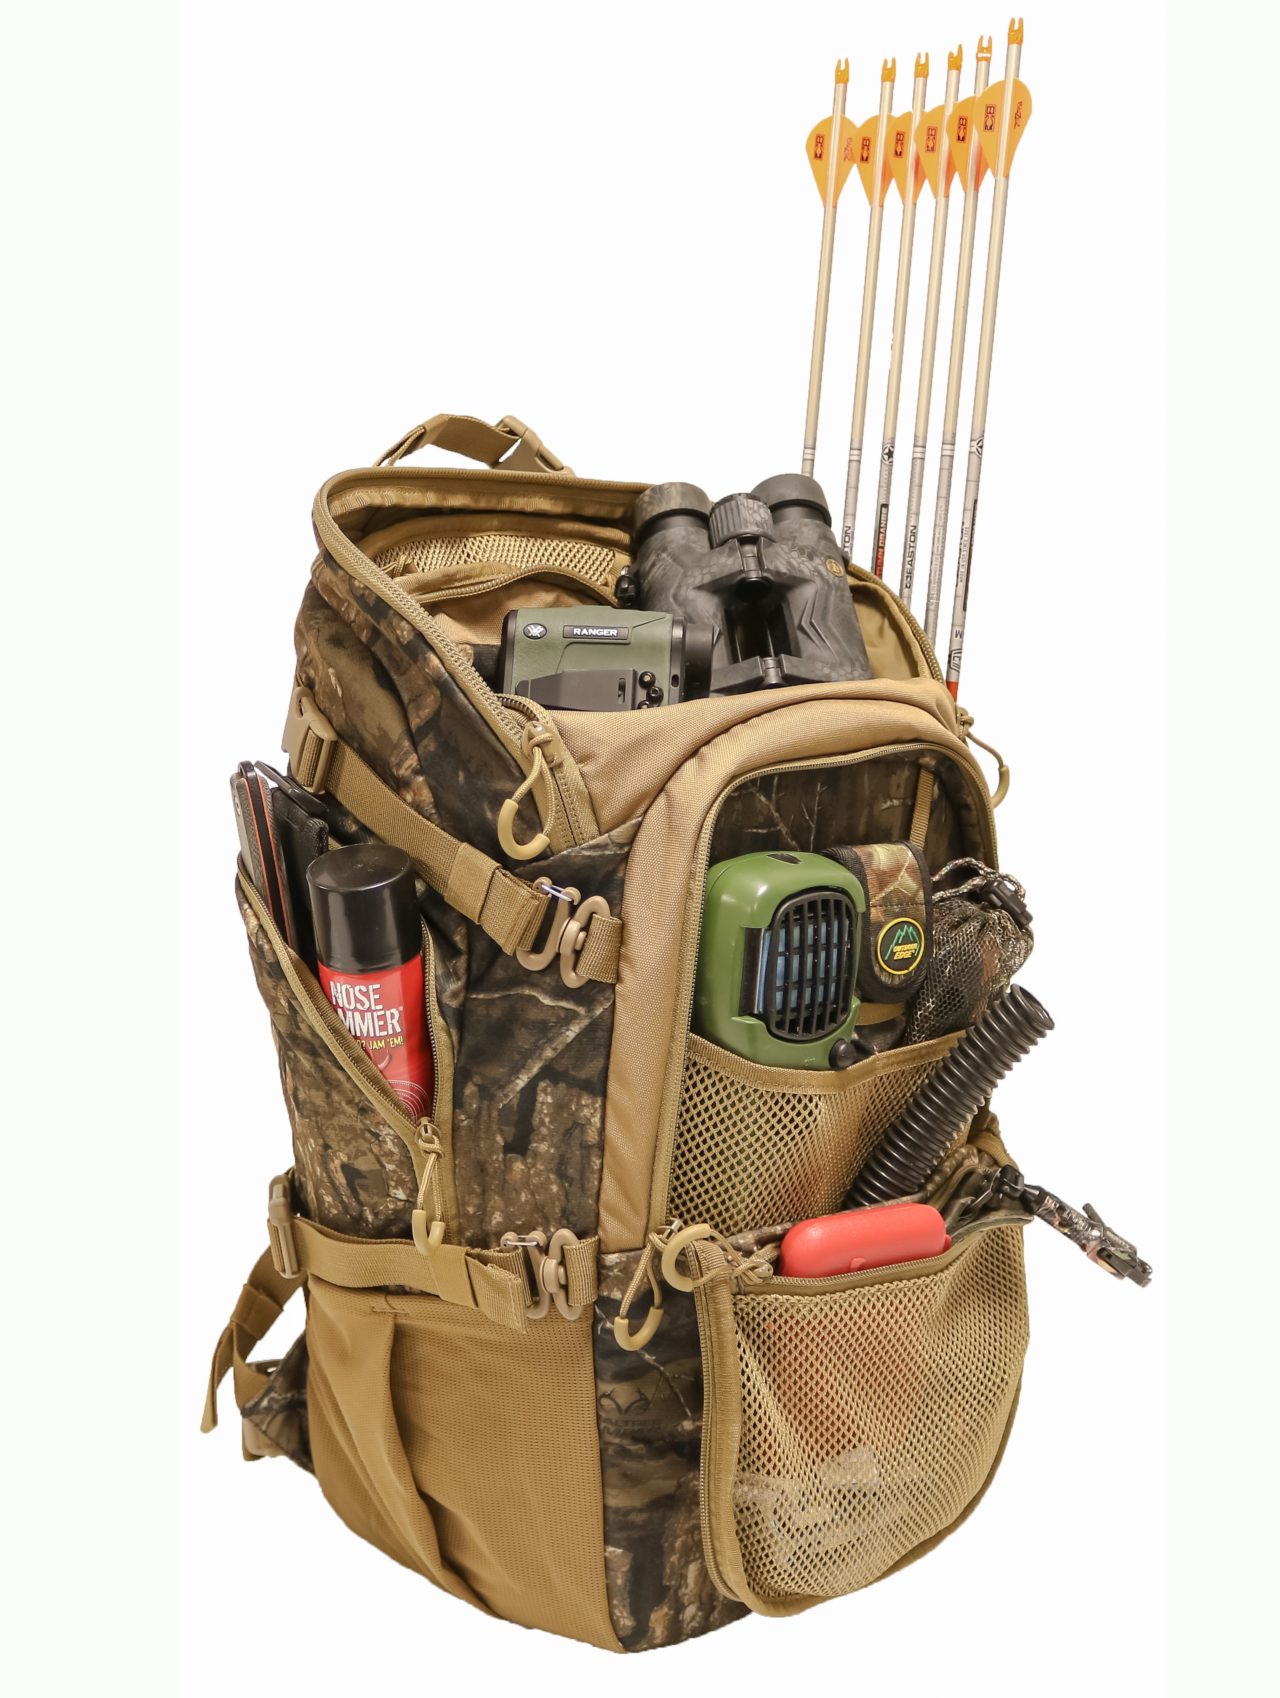 Nexgen’s Whitetail Caddy  is the ultimate hunting backpack